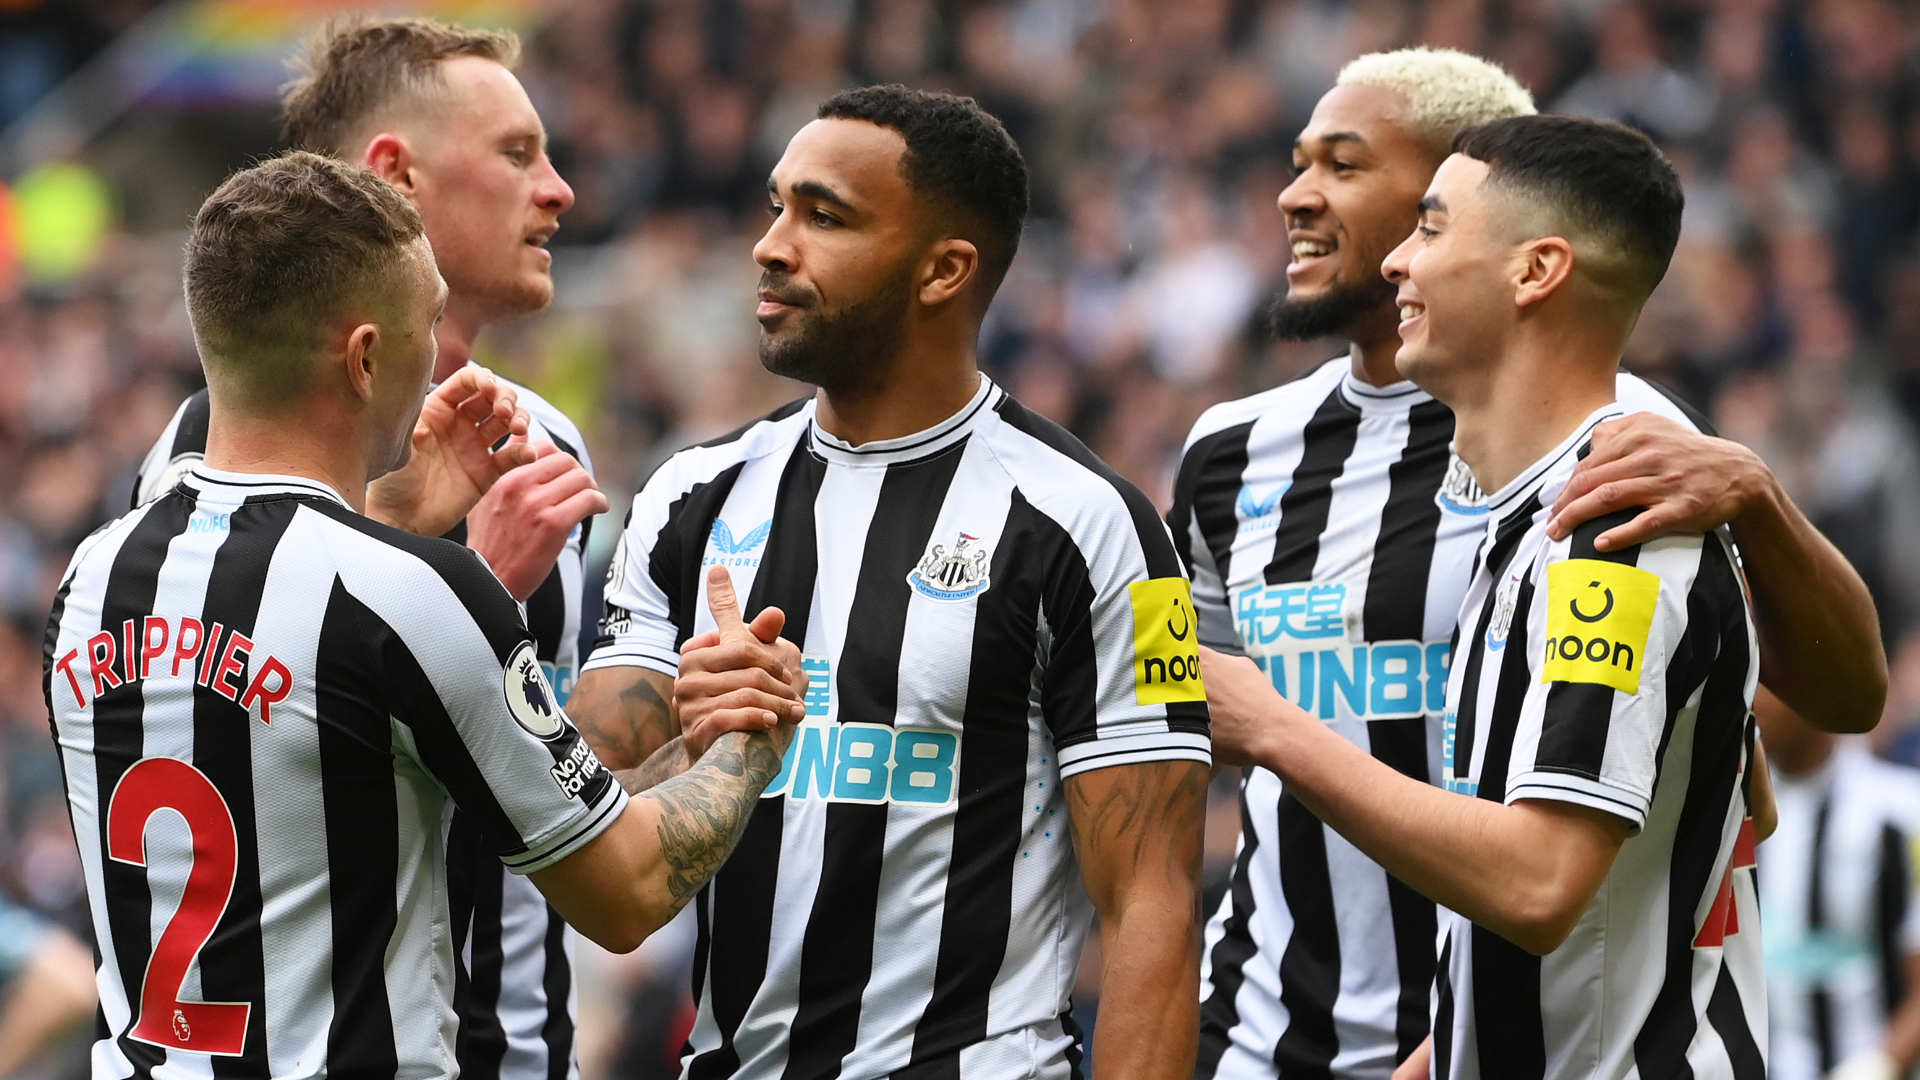 Everton vs Newcastle United Where to watch the match online, live stream, TV channels and kick-off time Goal UK